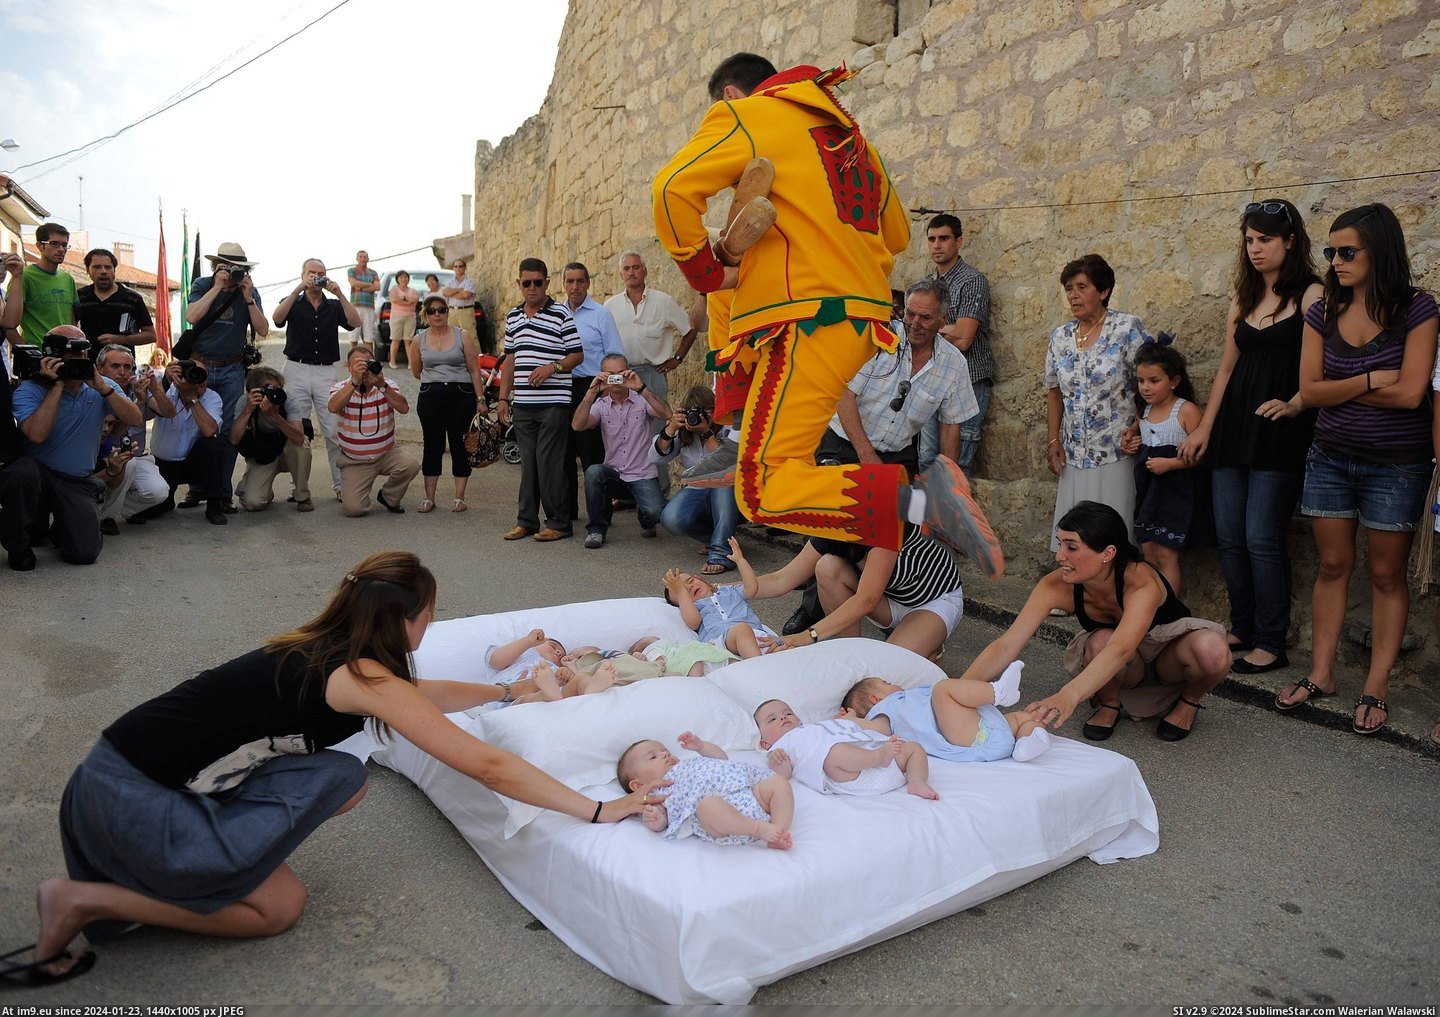 #Wtf #Baby #Jumping #Spain #Festival [Wtf] Baby Jumping Festival in Spain Pic. (Image of album My r/WTF favs))